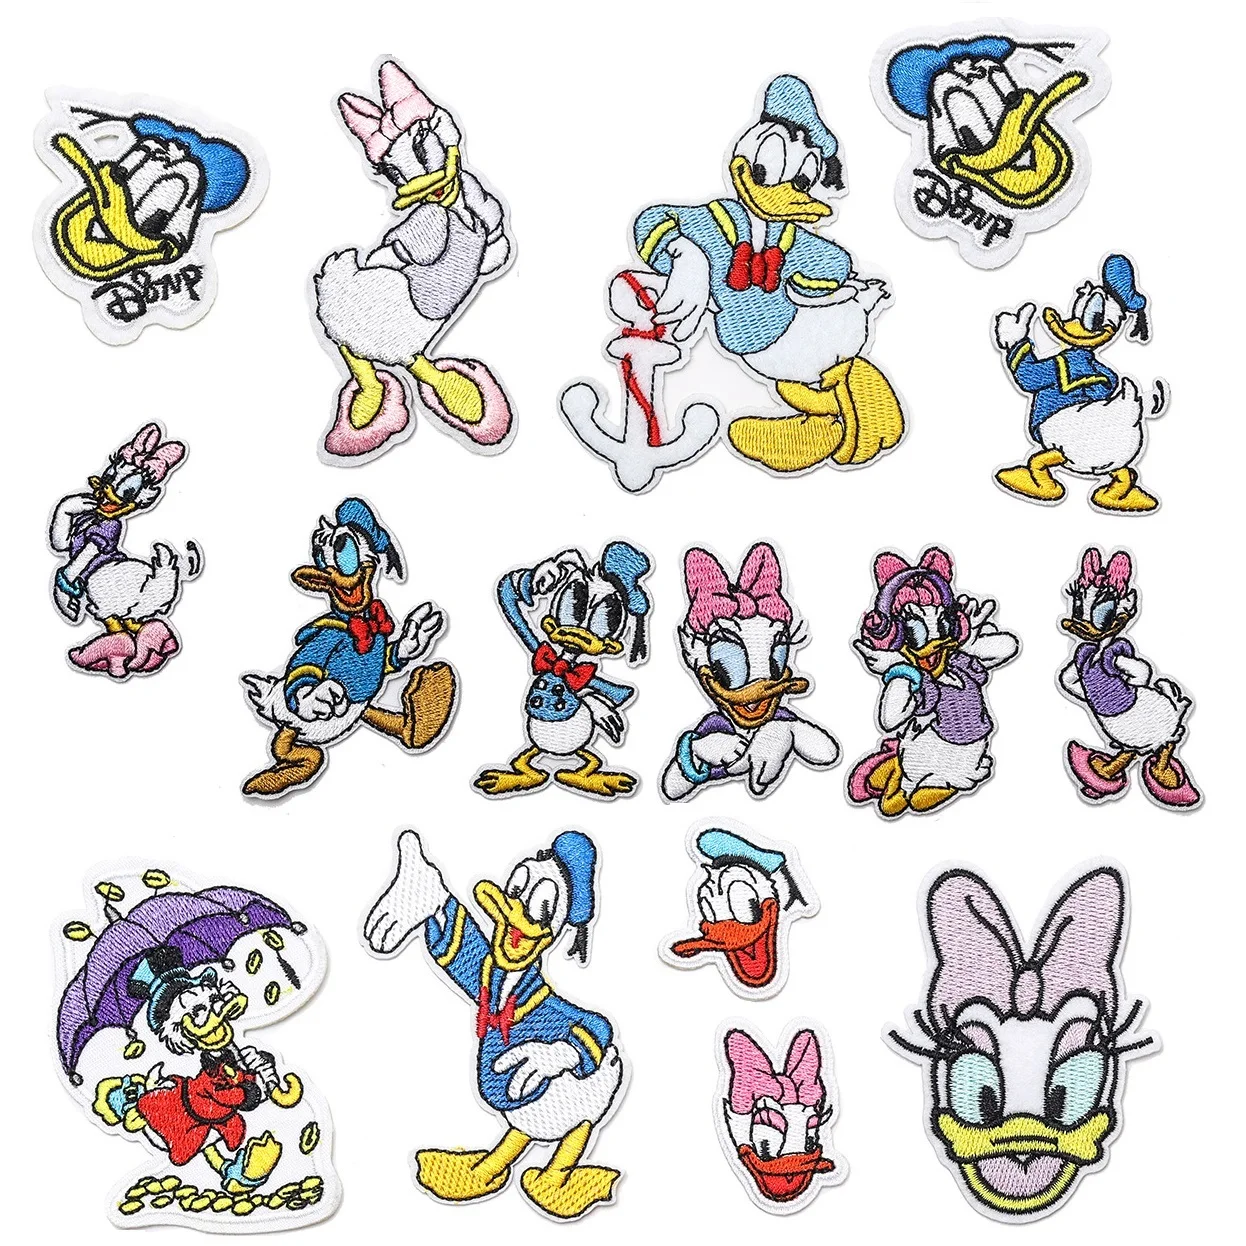 

16Pcs Disney Donald Duck Cartoon Cute Daisy Duck Iron on Embroidery Patch for on Child Clothing T-Shirt Jeans Clothes Applique